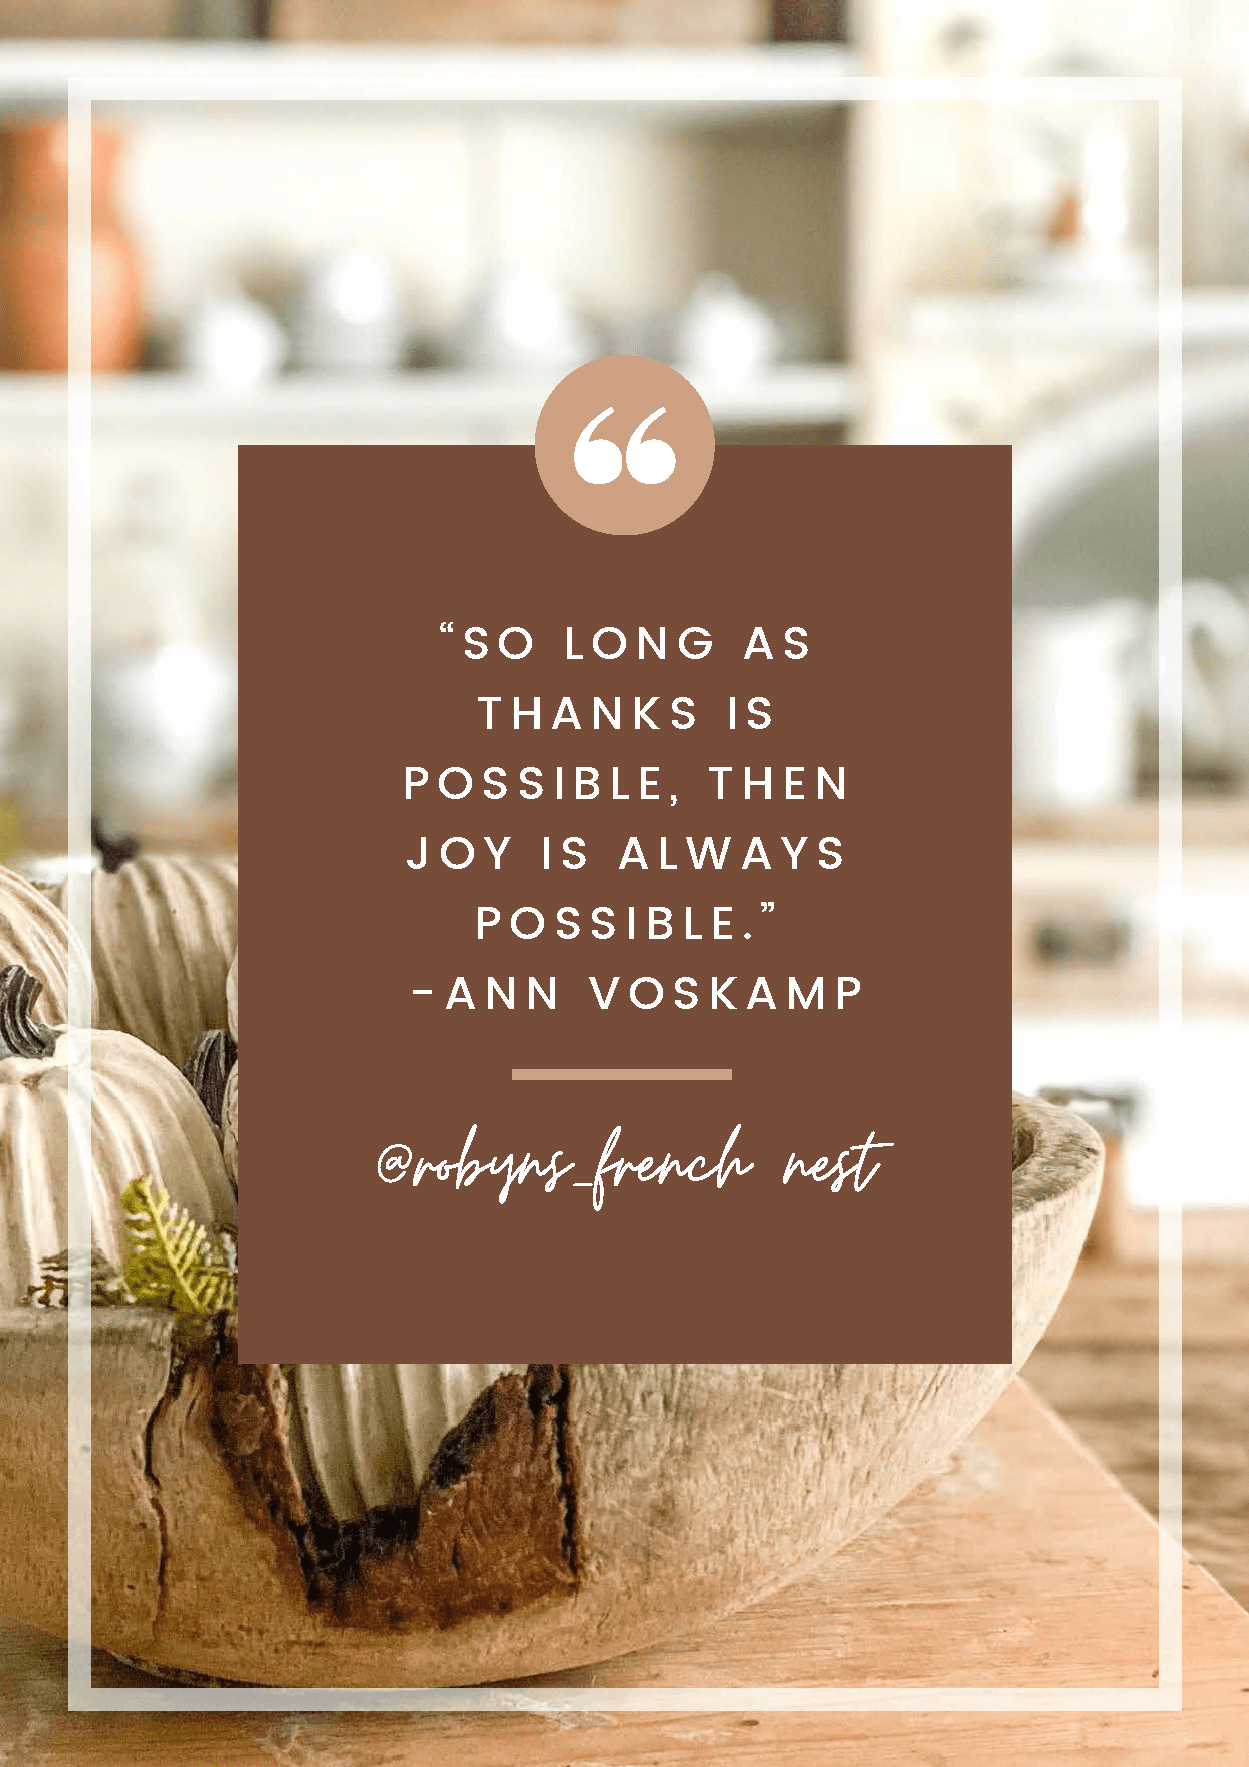 Ann Voskamp quote in front of a fall picture